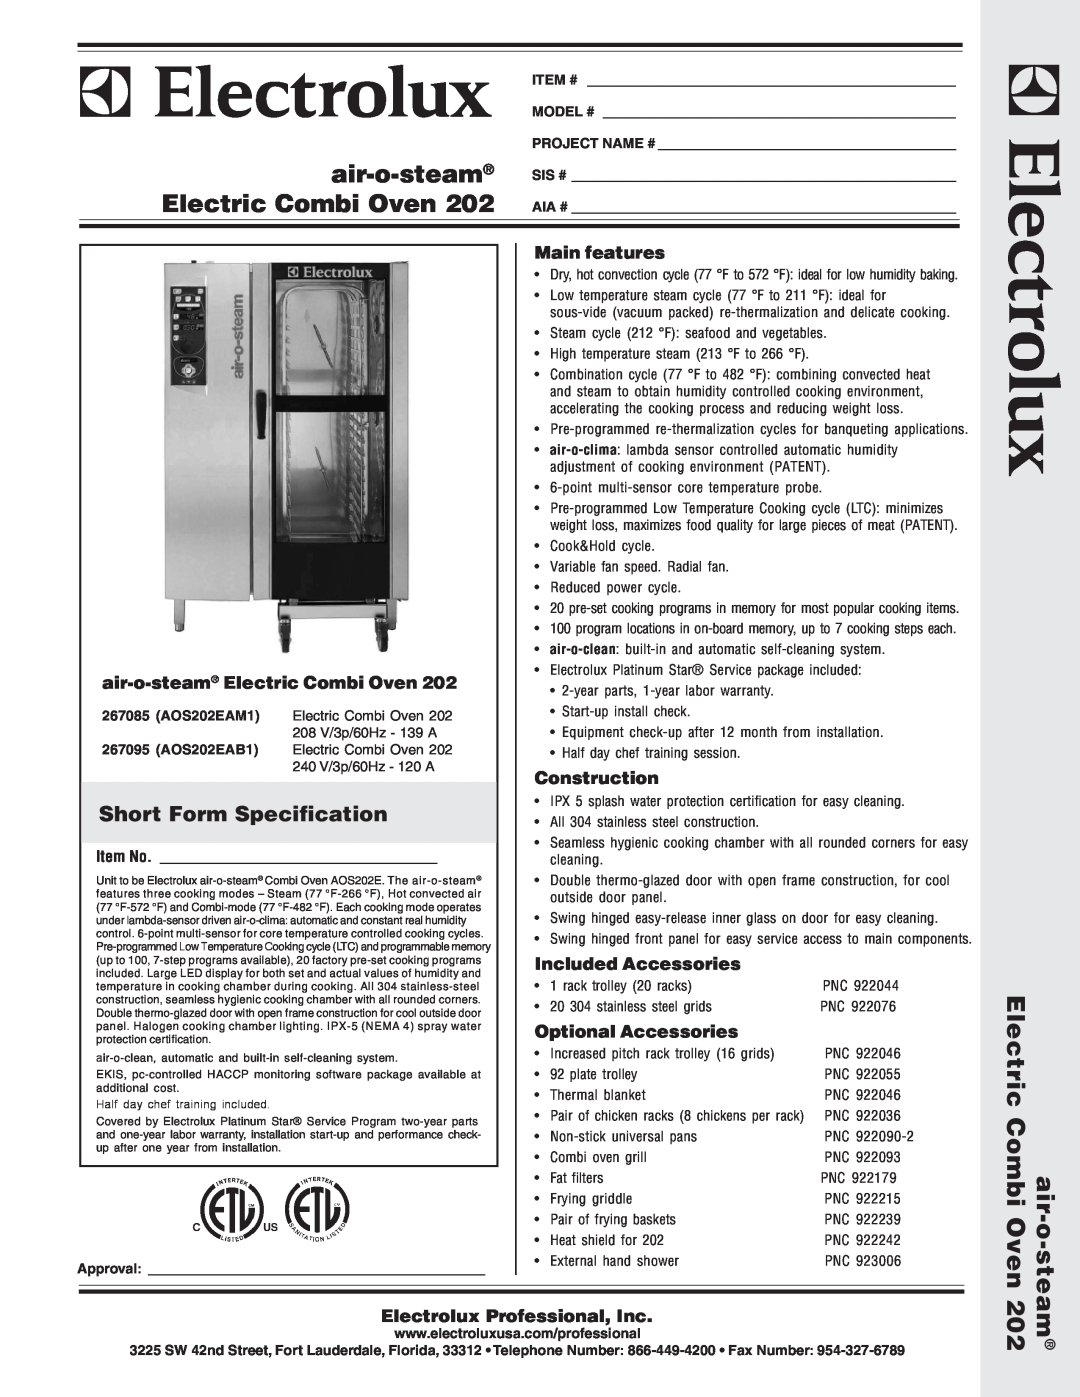 Electrolux AOS202EAM1 warranty Short Form Specification, Main features, air-o-steam Electric Combi Oven, Construction 